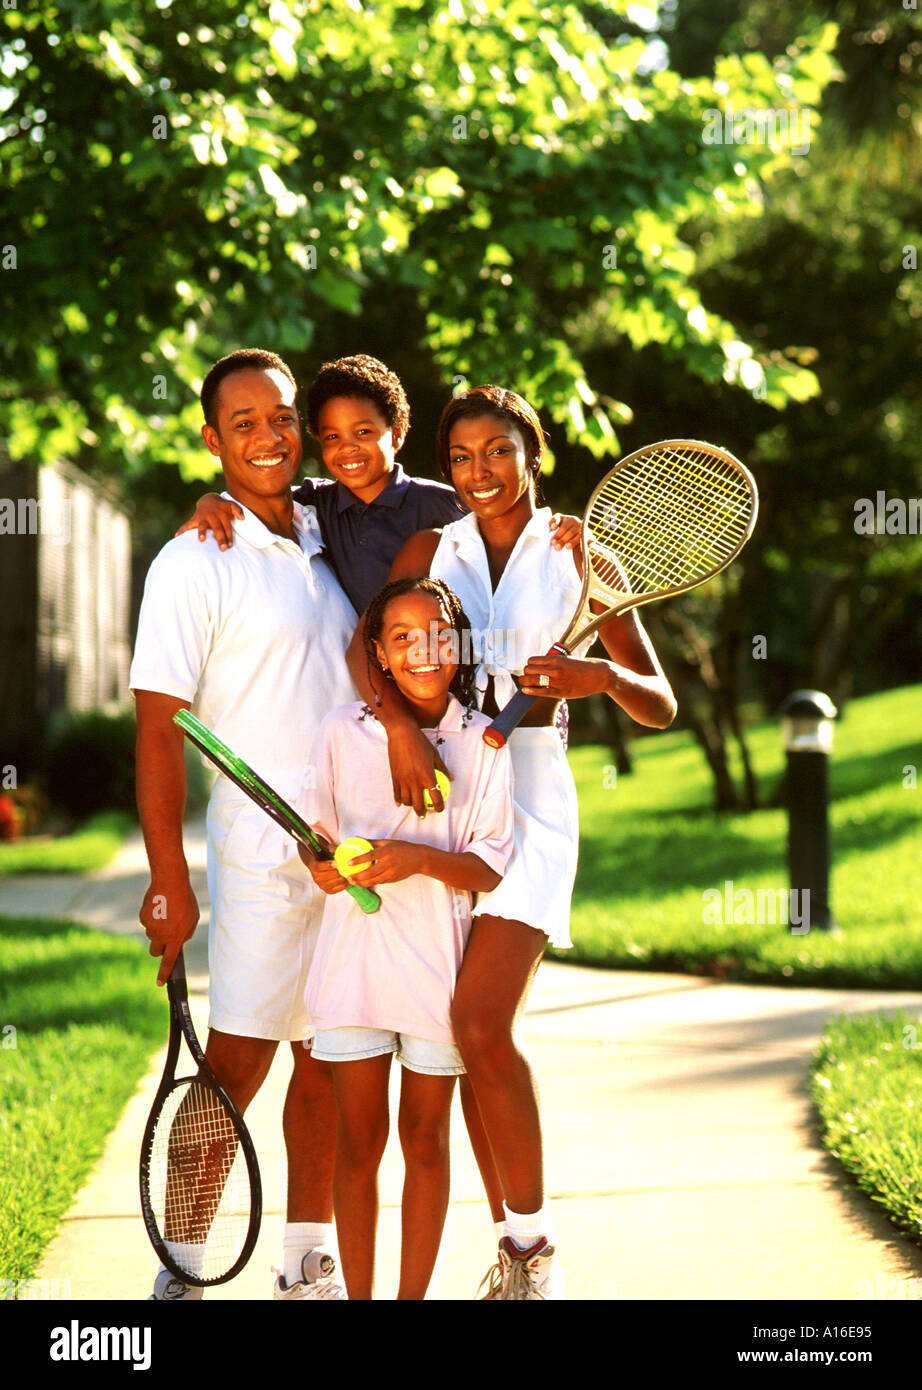 Black family walking together with tennis racquets Stock Photo - Alamy